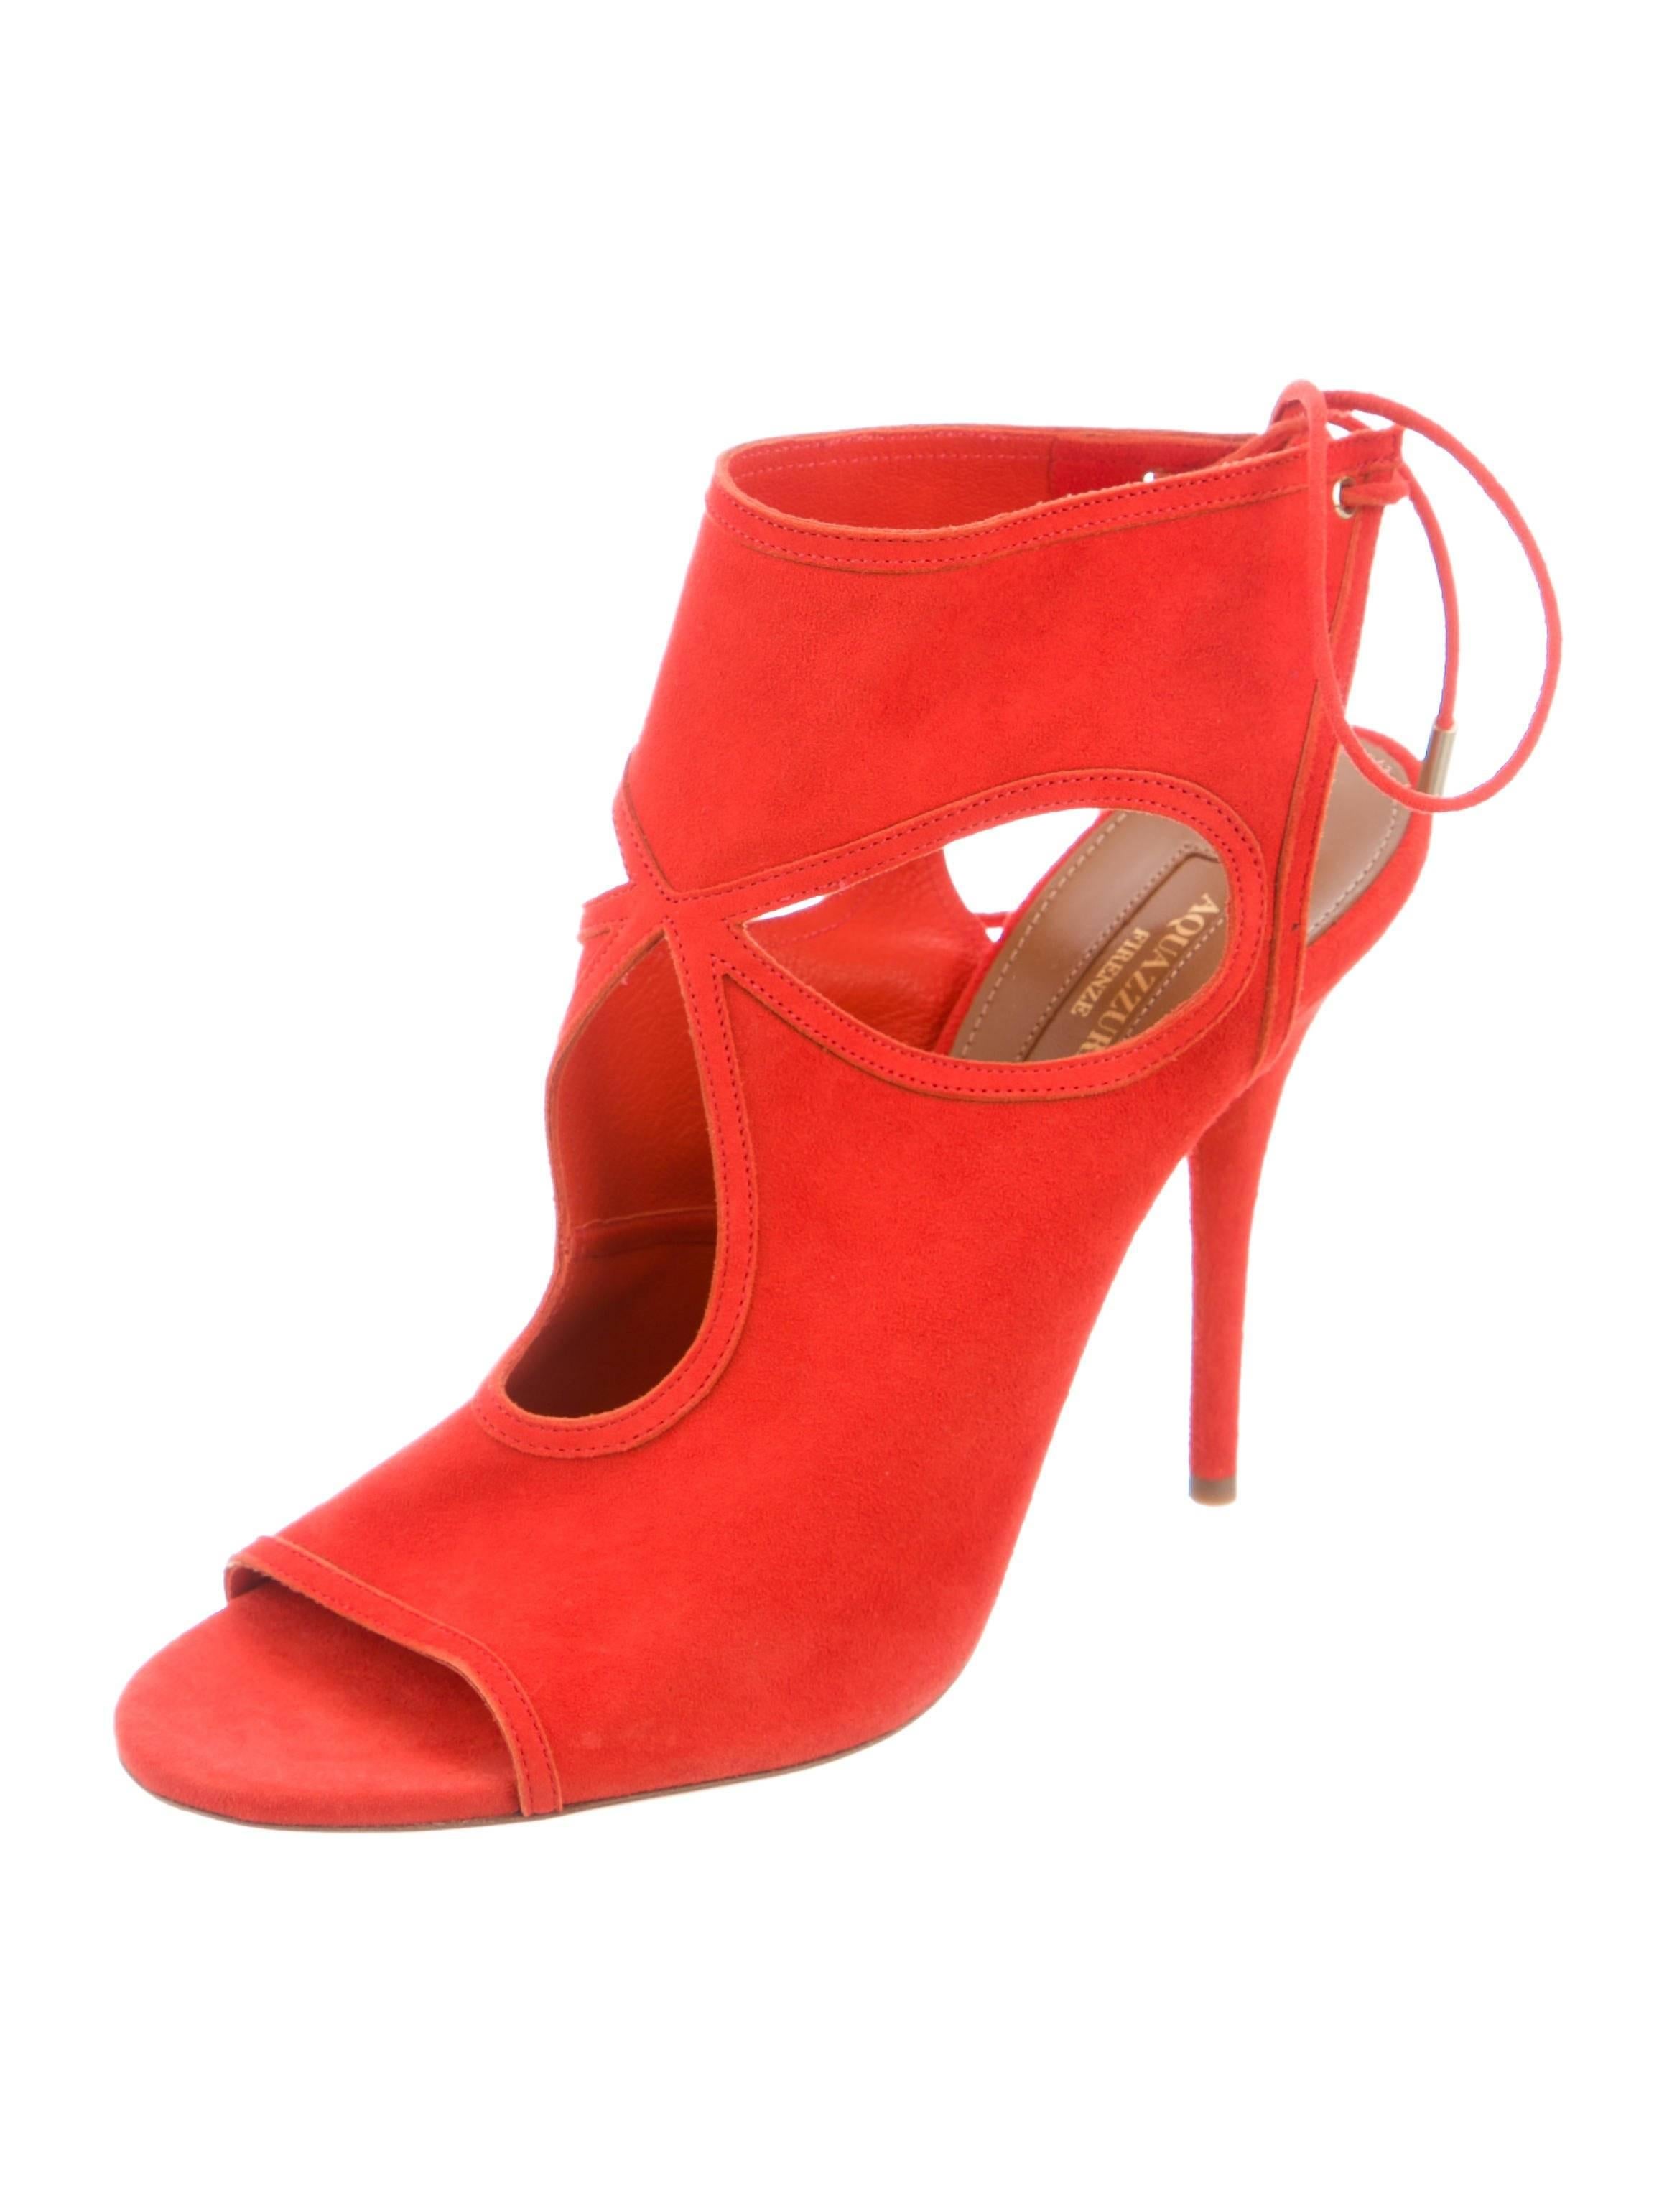 CURATOR'S NOTES

Aquazzura New Burnt Orange Red Cashmere Suede Cut Out Sandals Heels in Box  

Size IT 36
Cashmere suede
Ankle tie closure
Made in Italy
Heel height 4"
Includes original Aquazzura dust bag and box